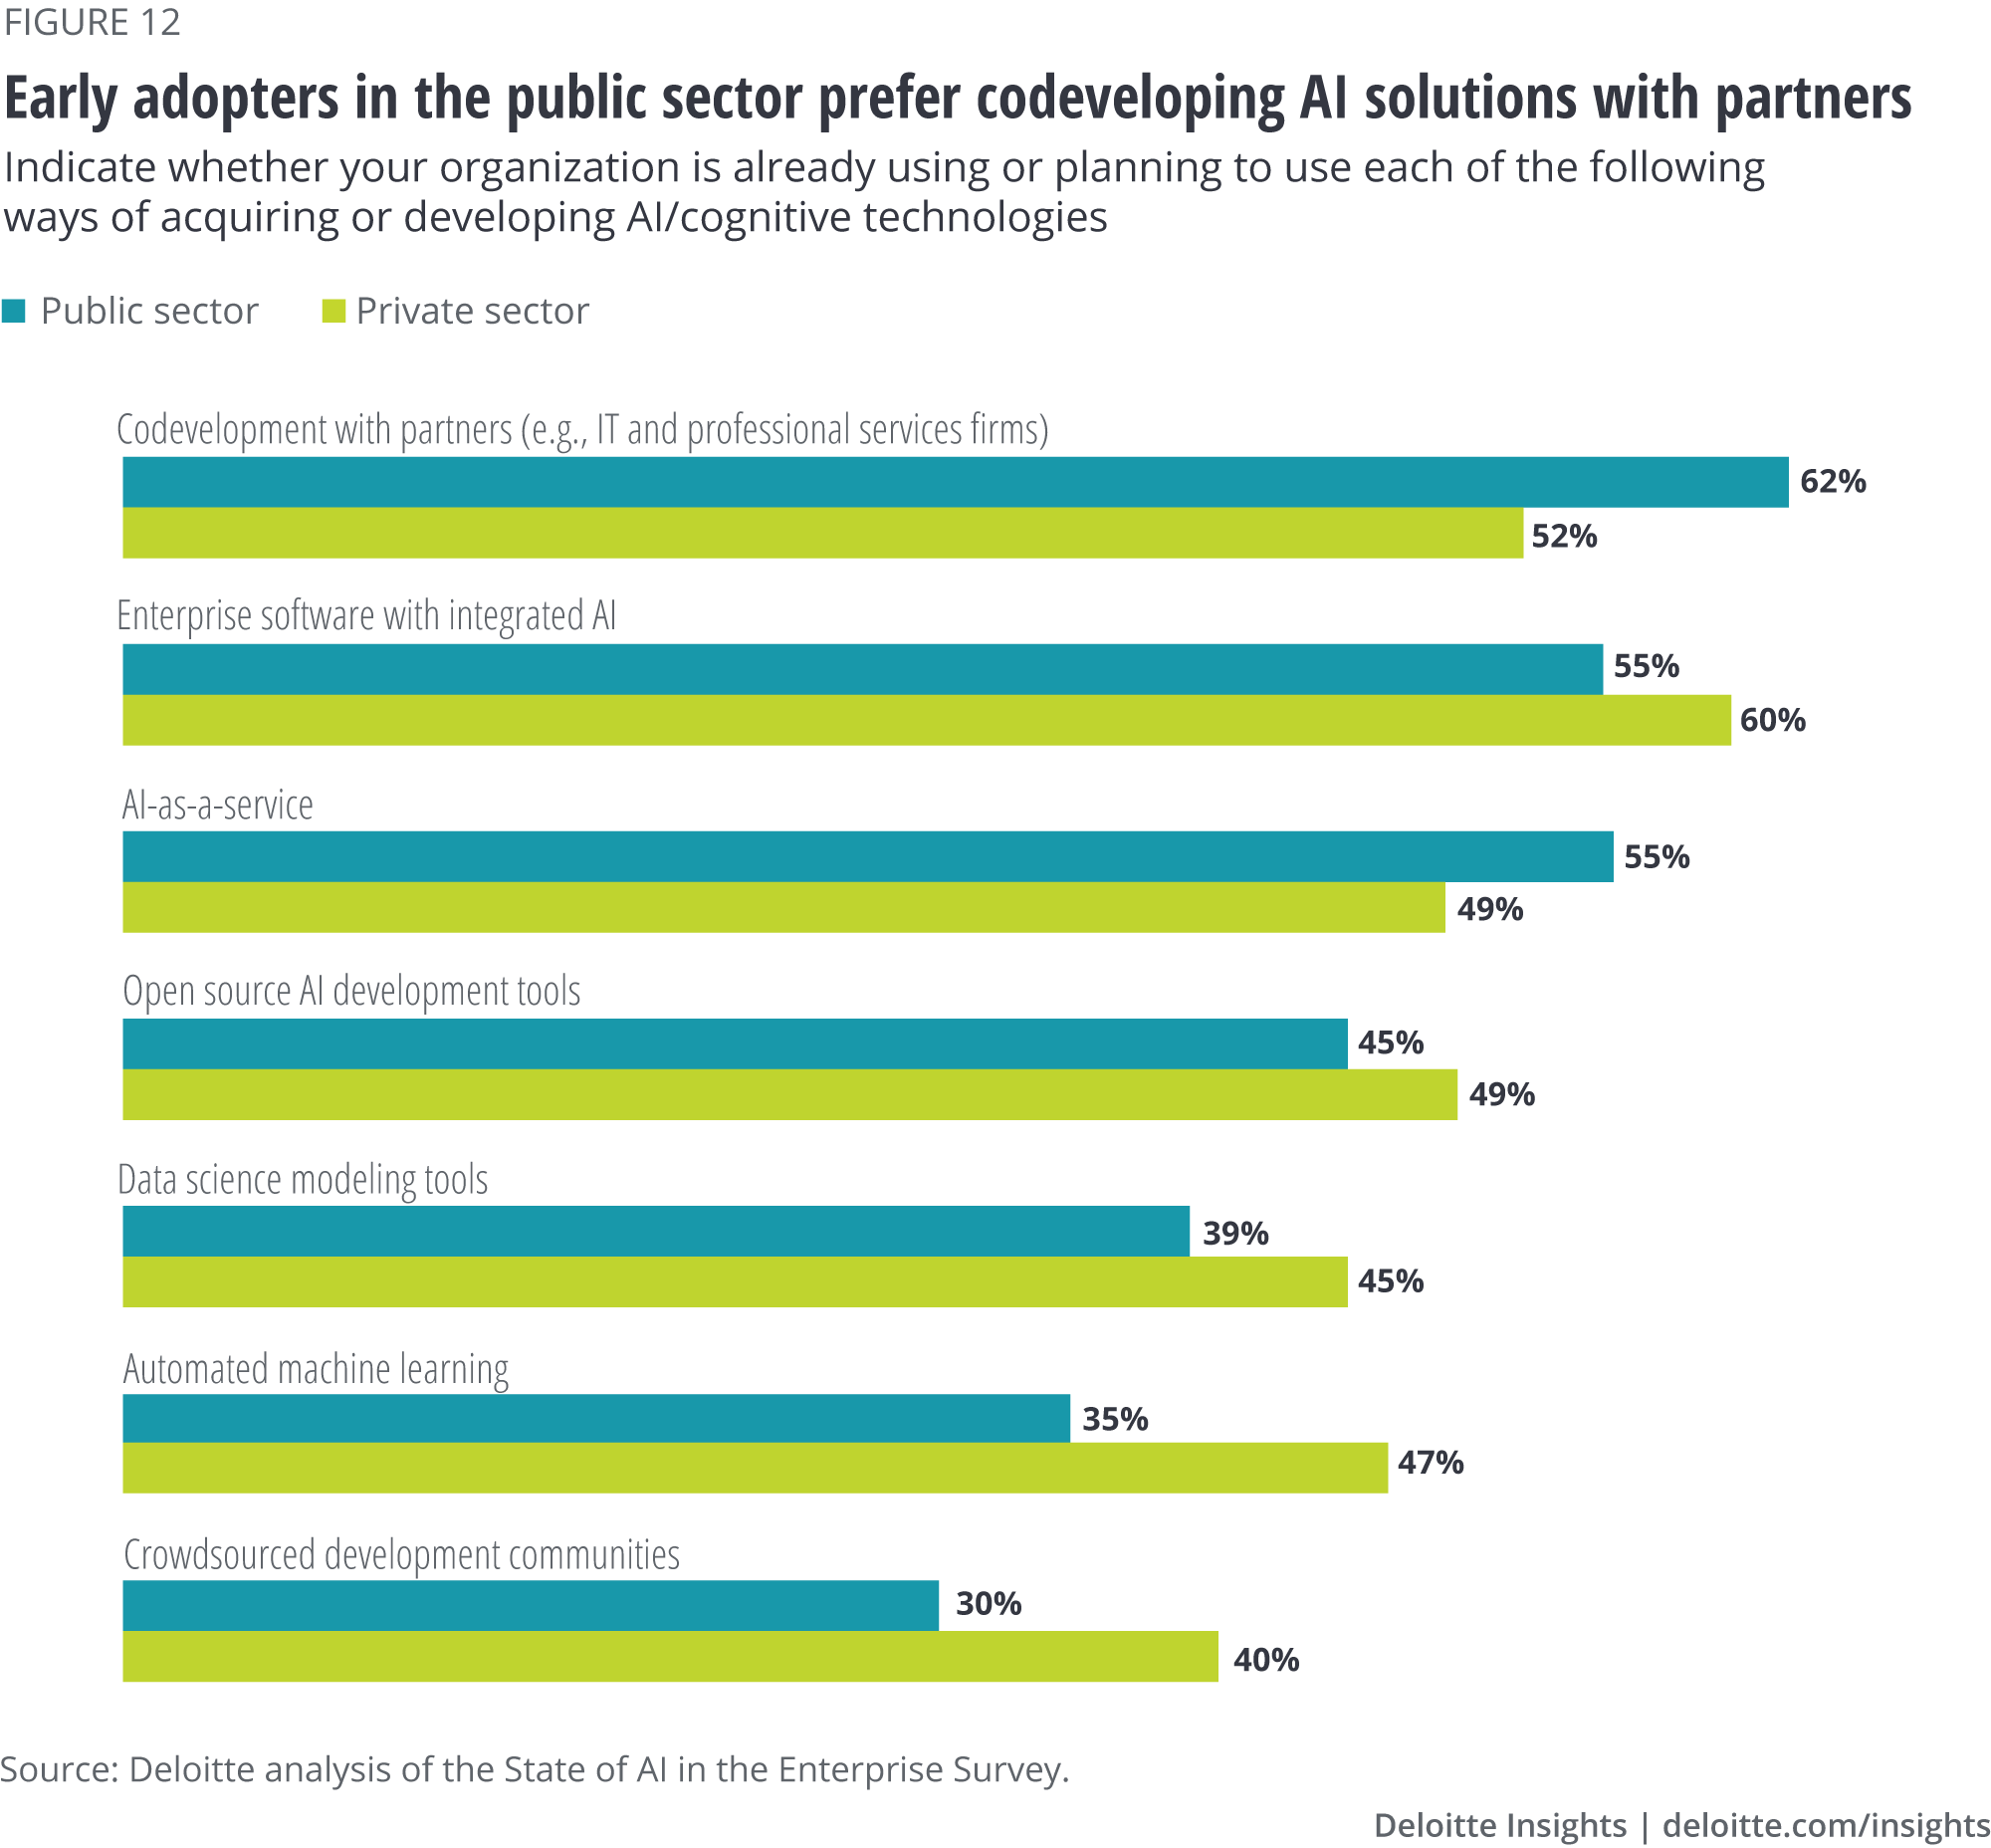 Early adopters in the public sector prefer codeveloping AI solutions with partners